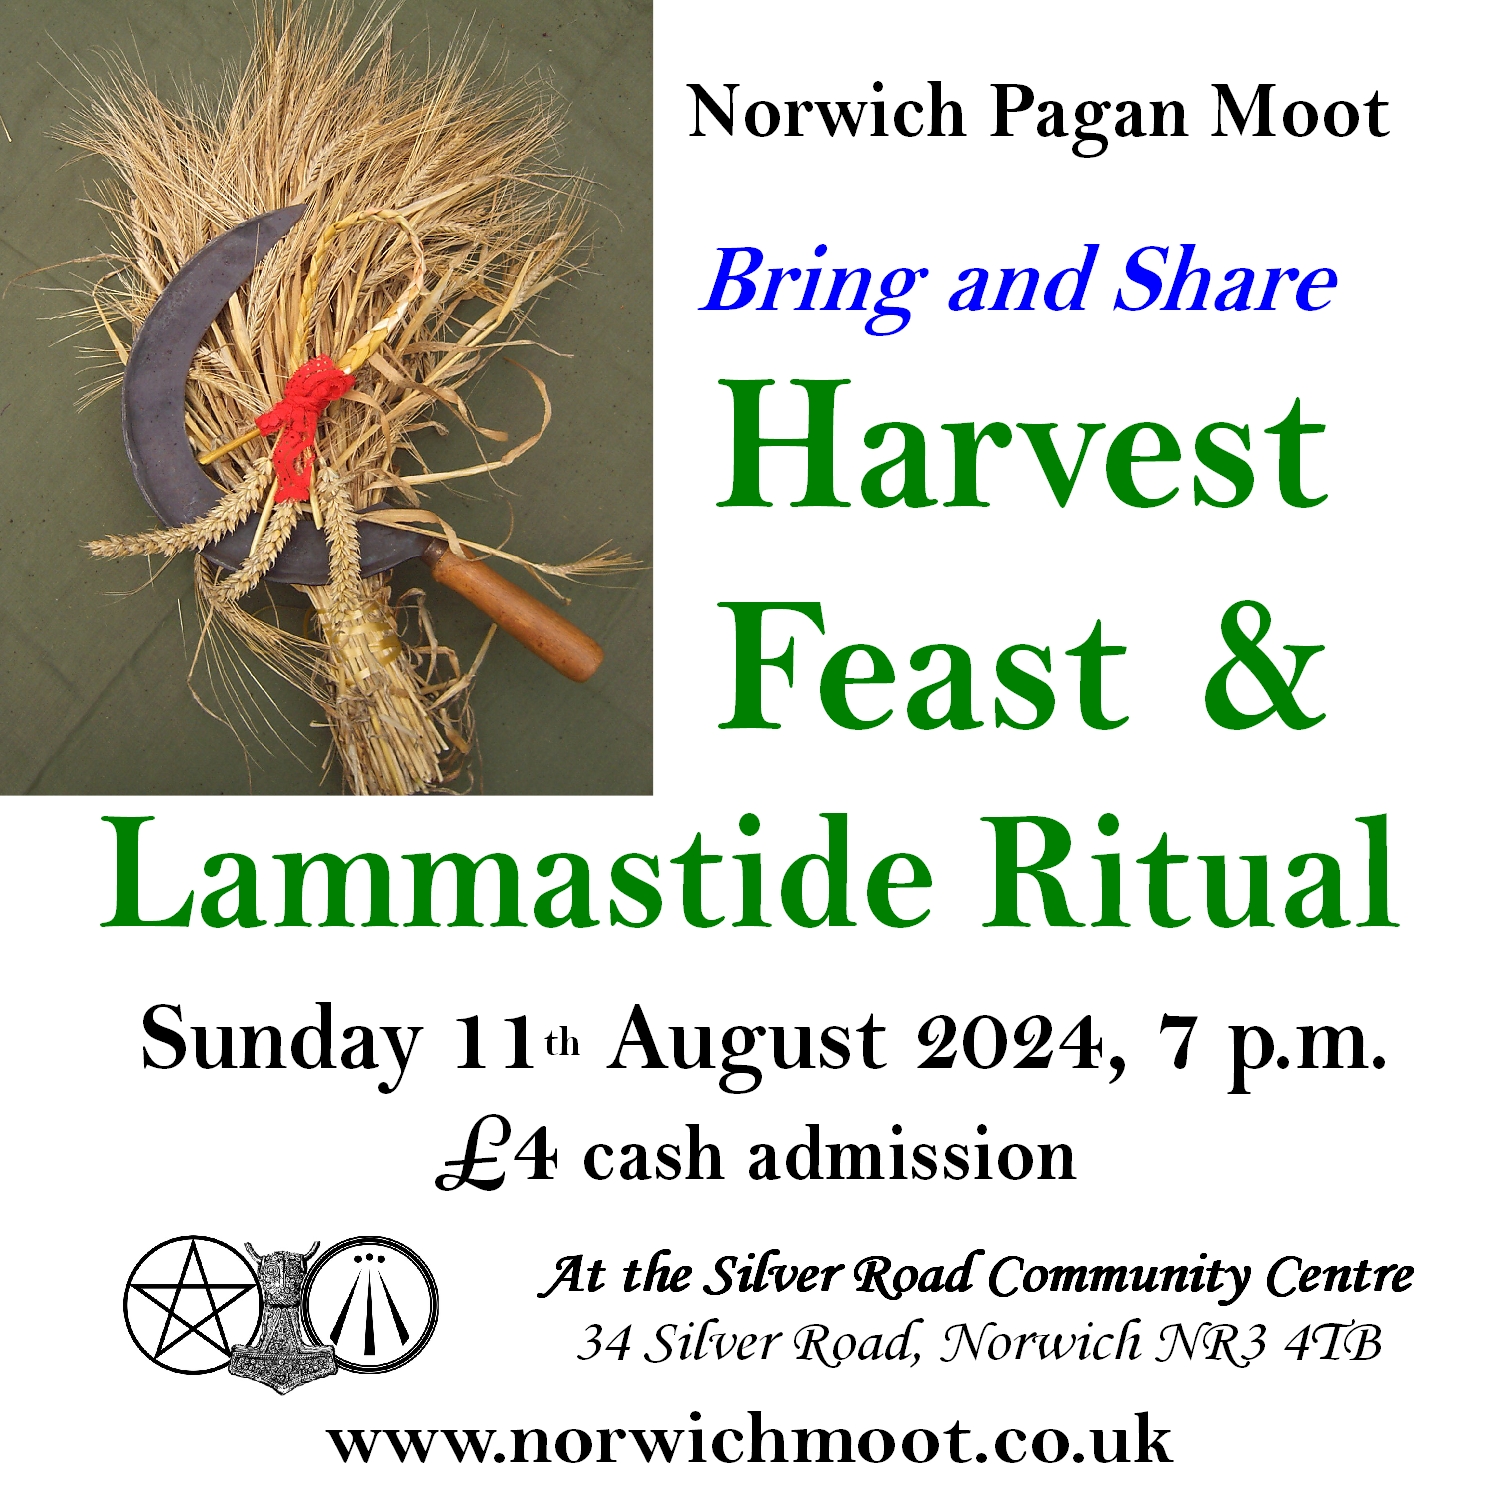 Image promoting the Norwich Moot harvest feast and ritual on Sunday 11th August 2024 at 7 p.m., showing a sheaf of barley with a sickle and corn dolly (tied with red wool) on top, all on a green cloth.